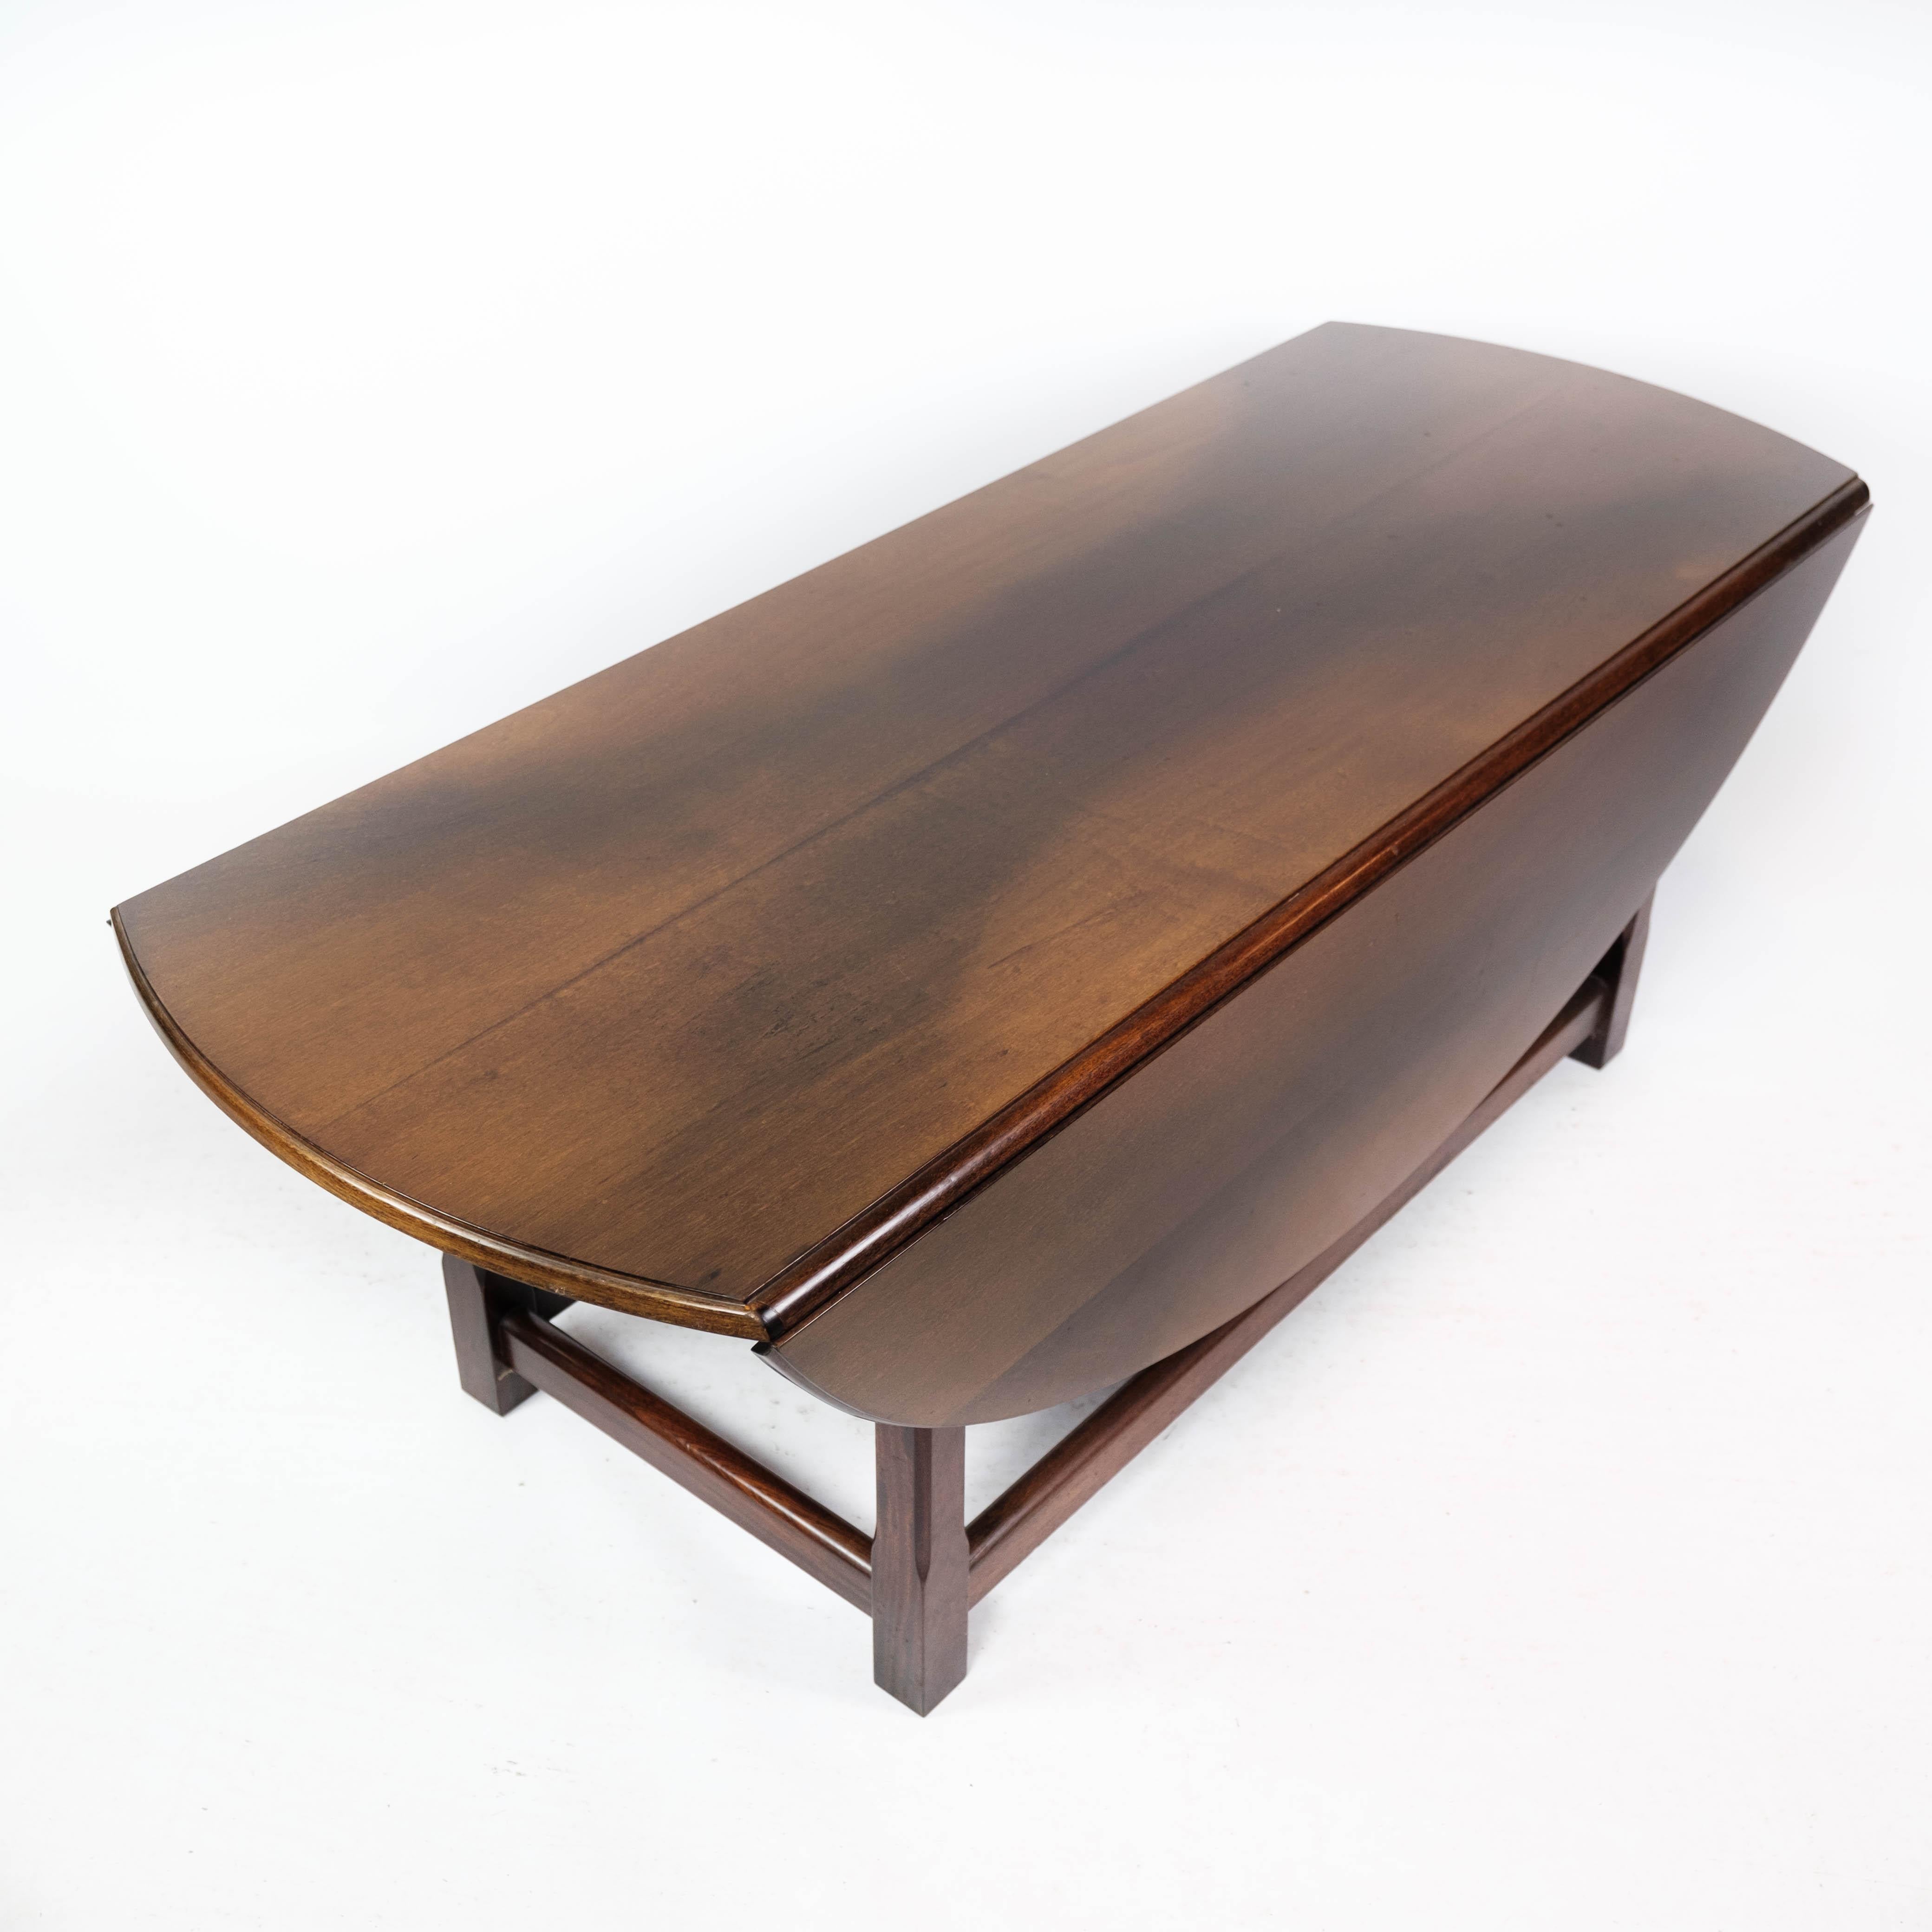 This exquisite coffee table, crafted from rich mahogany, embodies the timeless elegance of the 1930s design era. Its classic design and impeccable craftsmanship make it a stunning addition to any living space.

The mahogany wood lends a warm and